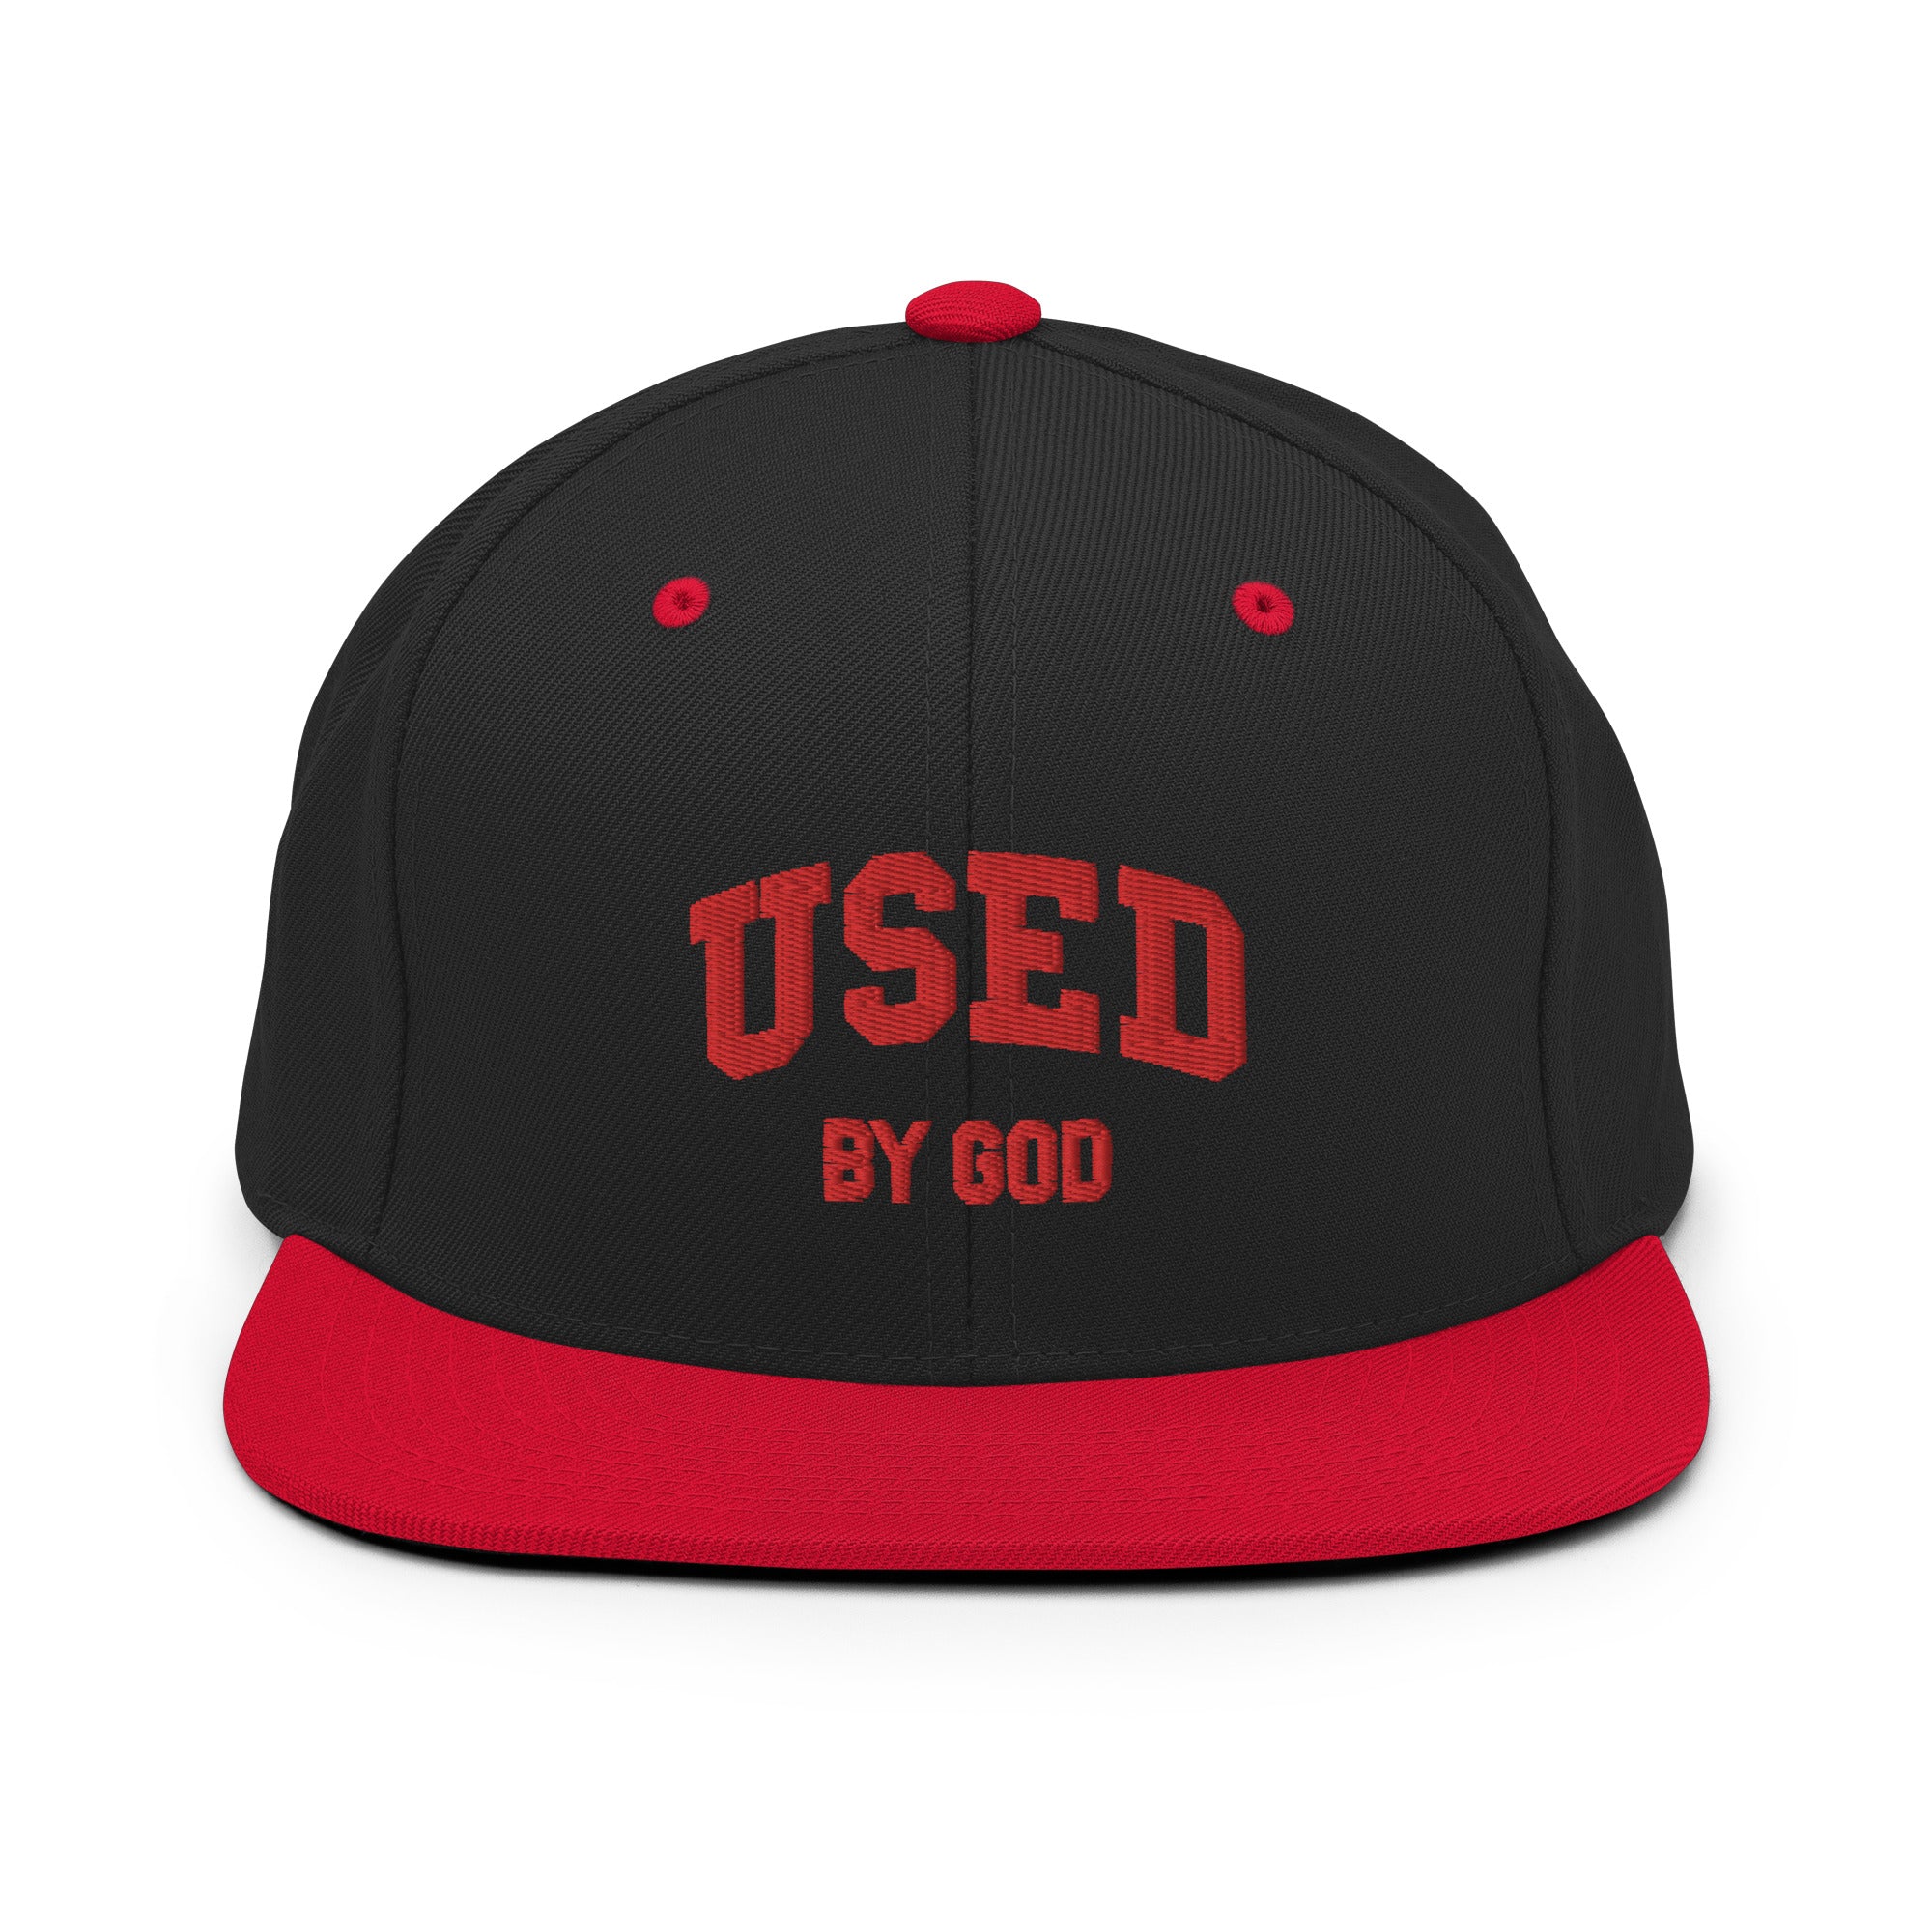 UBG Collegiate Fire Snapback Hat, Used By God, Used By God Clothing, Christian Apparel, Christian Hats, Christian T-Shirts, Christian Clothing, God Shirts, Christian Sweatshirts, God Clothing, Jesus Hoodie, Jesus Clothes, God Is Dope, Art Of Homage, Red Letter Clothing, Elevated Faith, Active Faith Sports, Beacon Threads, God The Father Apparel